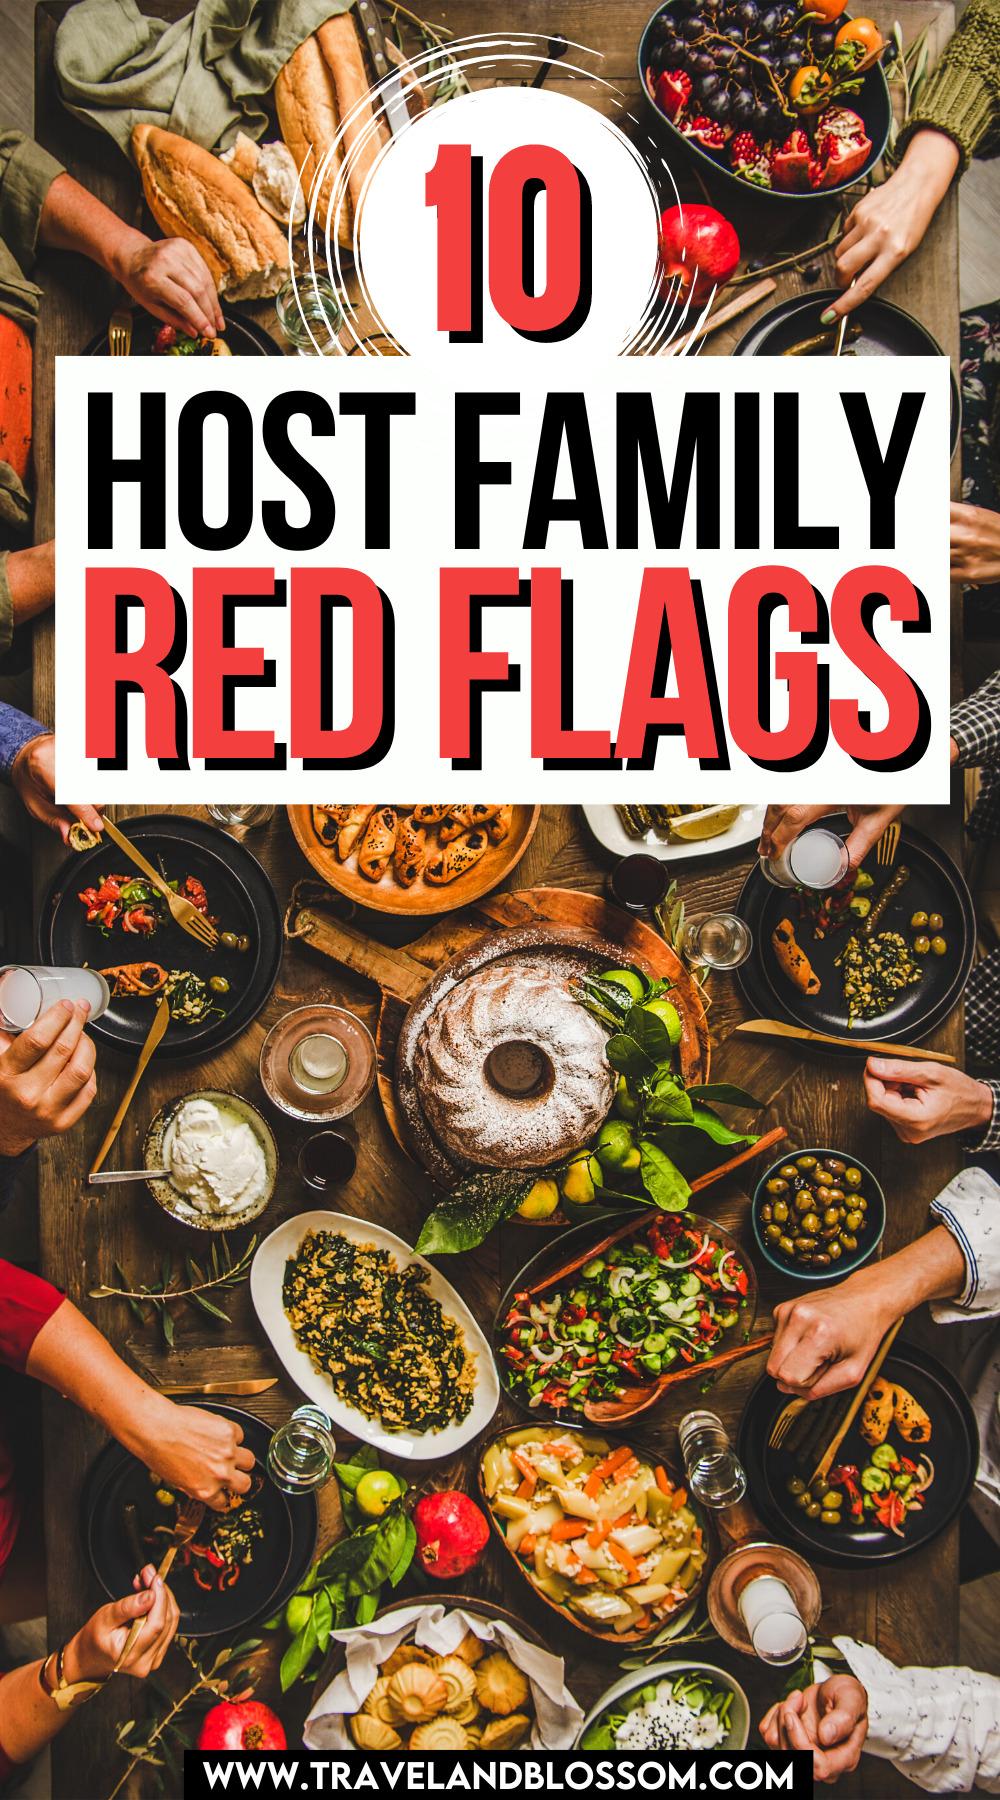 10 Host Family Red Flags You Should Watch Out For